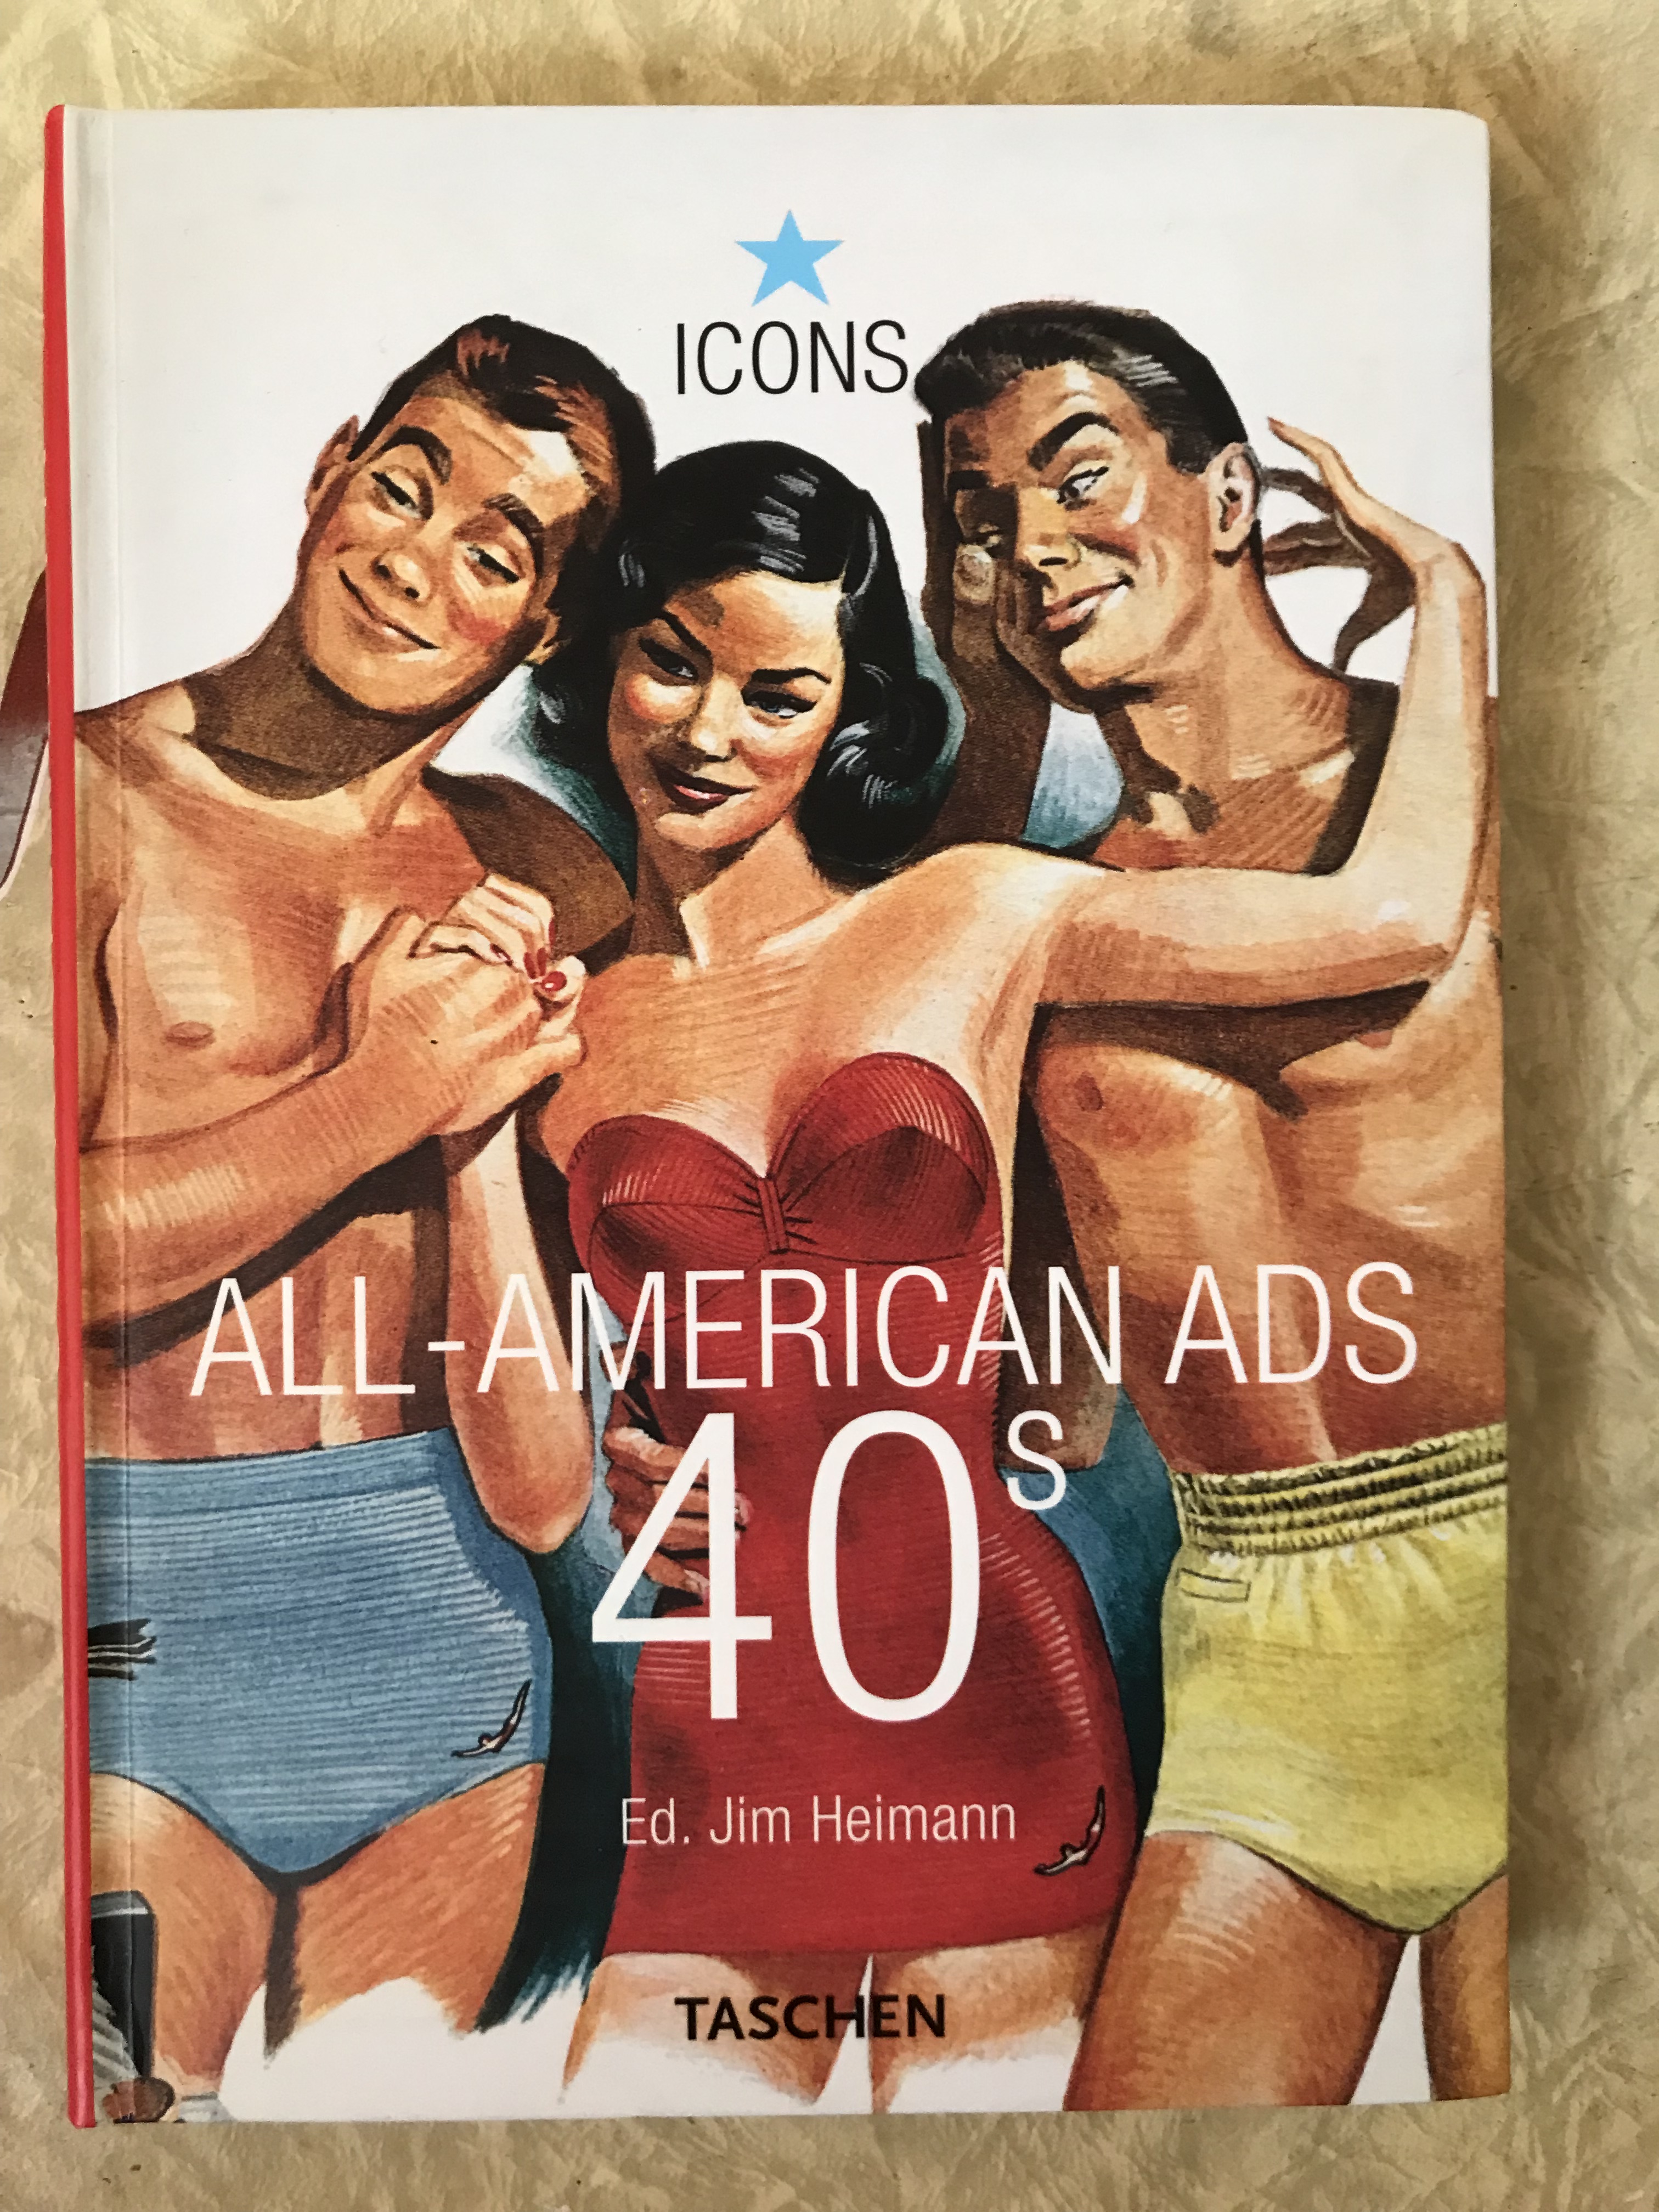 all american ads 40s taschen icons